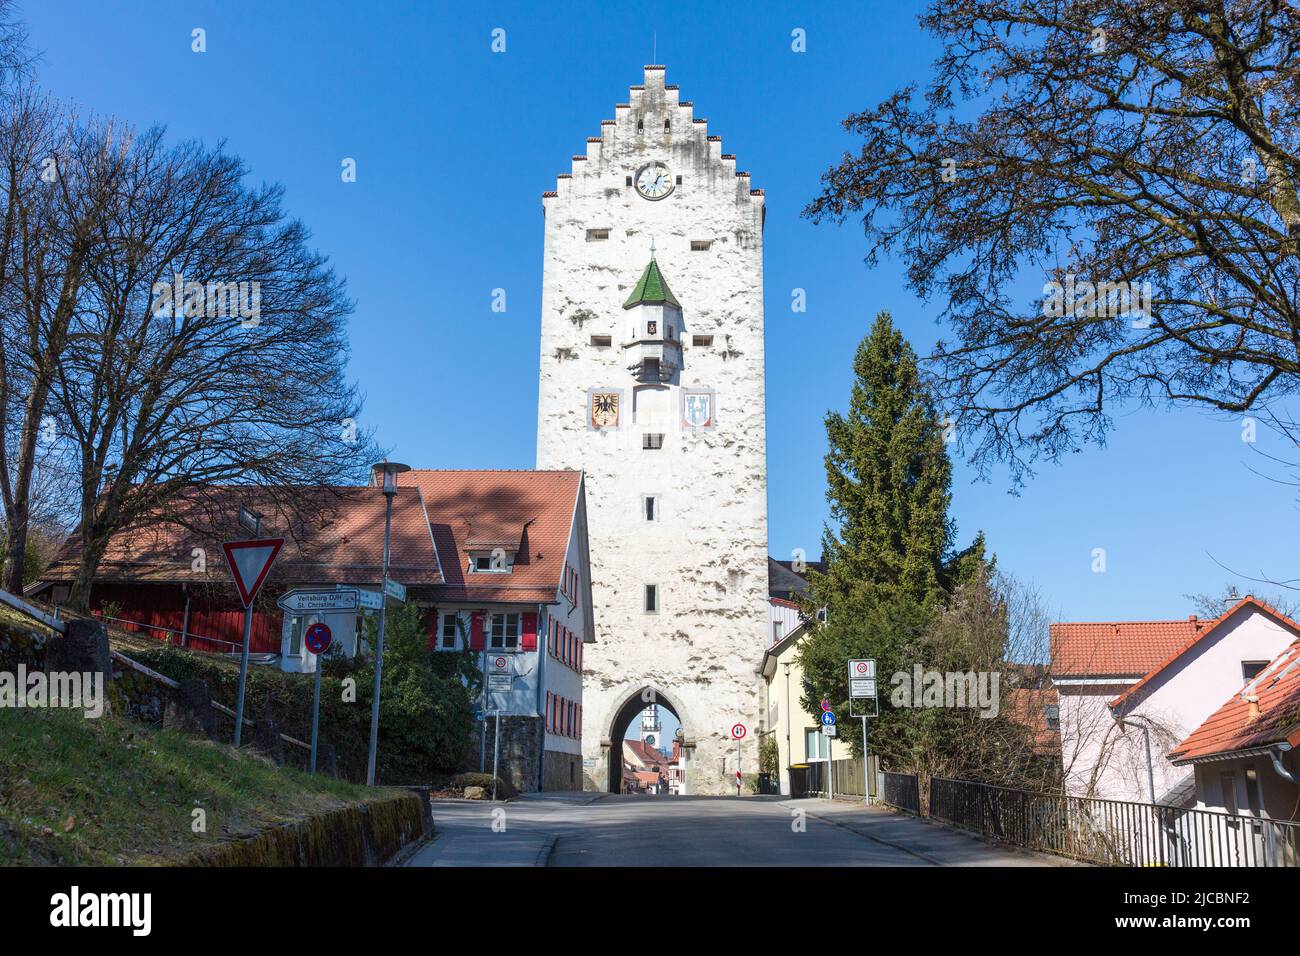 Ravensburg, Germany - Mar 23, 2022: Obertor tower - a historical city gate and tower in the city of Ravensburg. Stock Photo